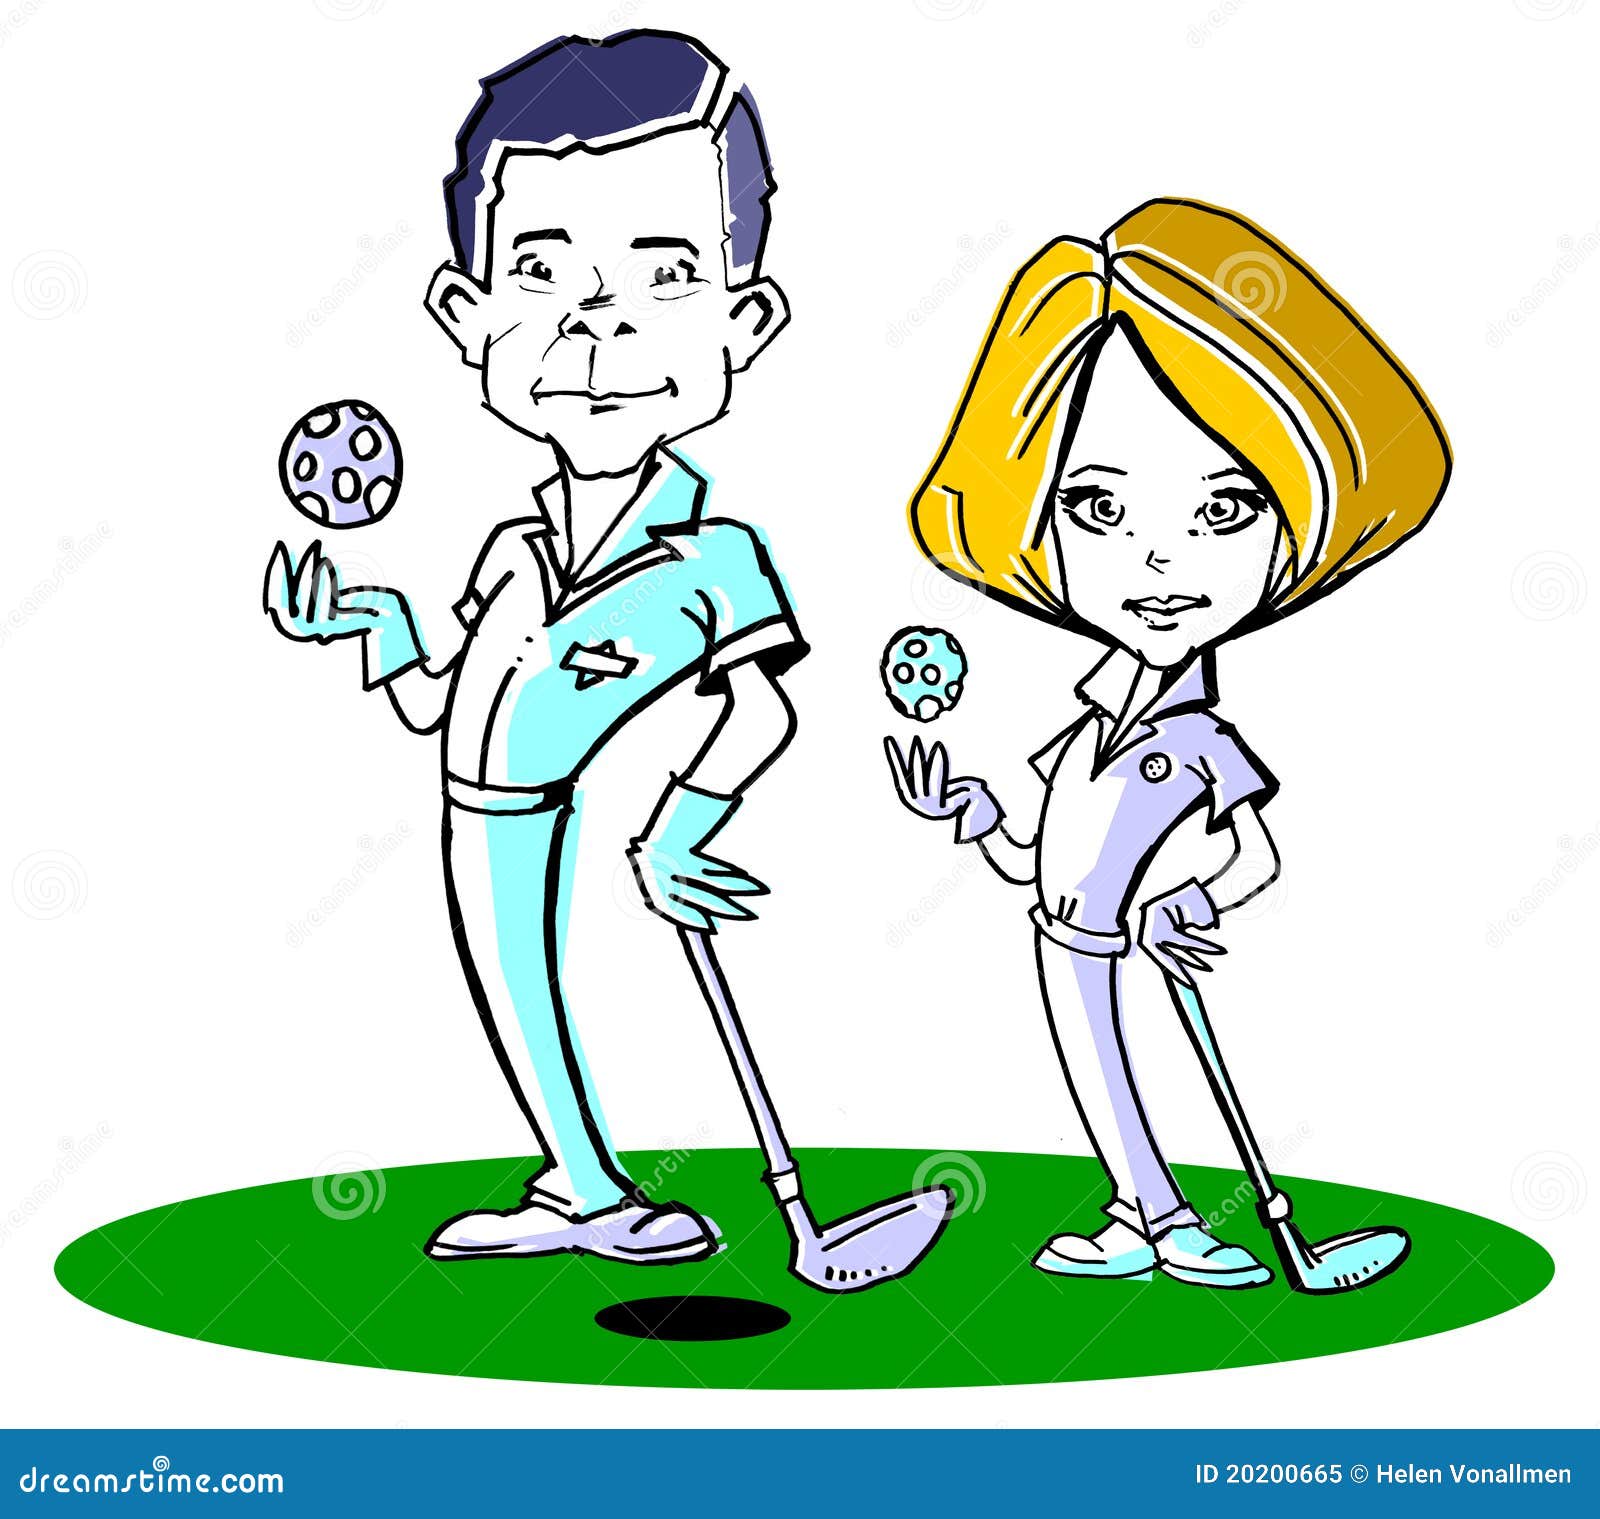 free golf clipart for mac - photo #31